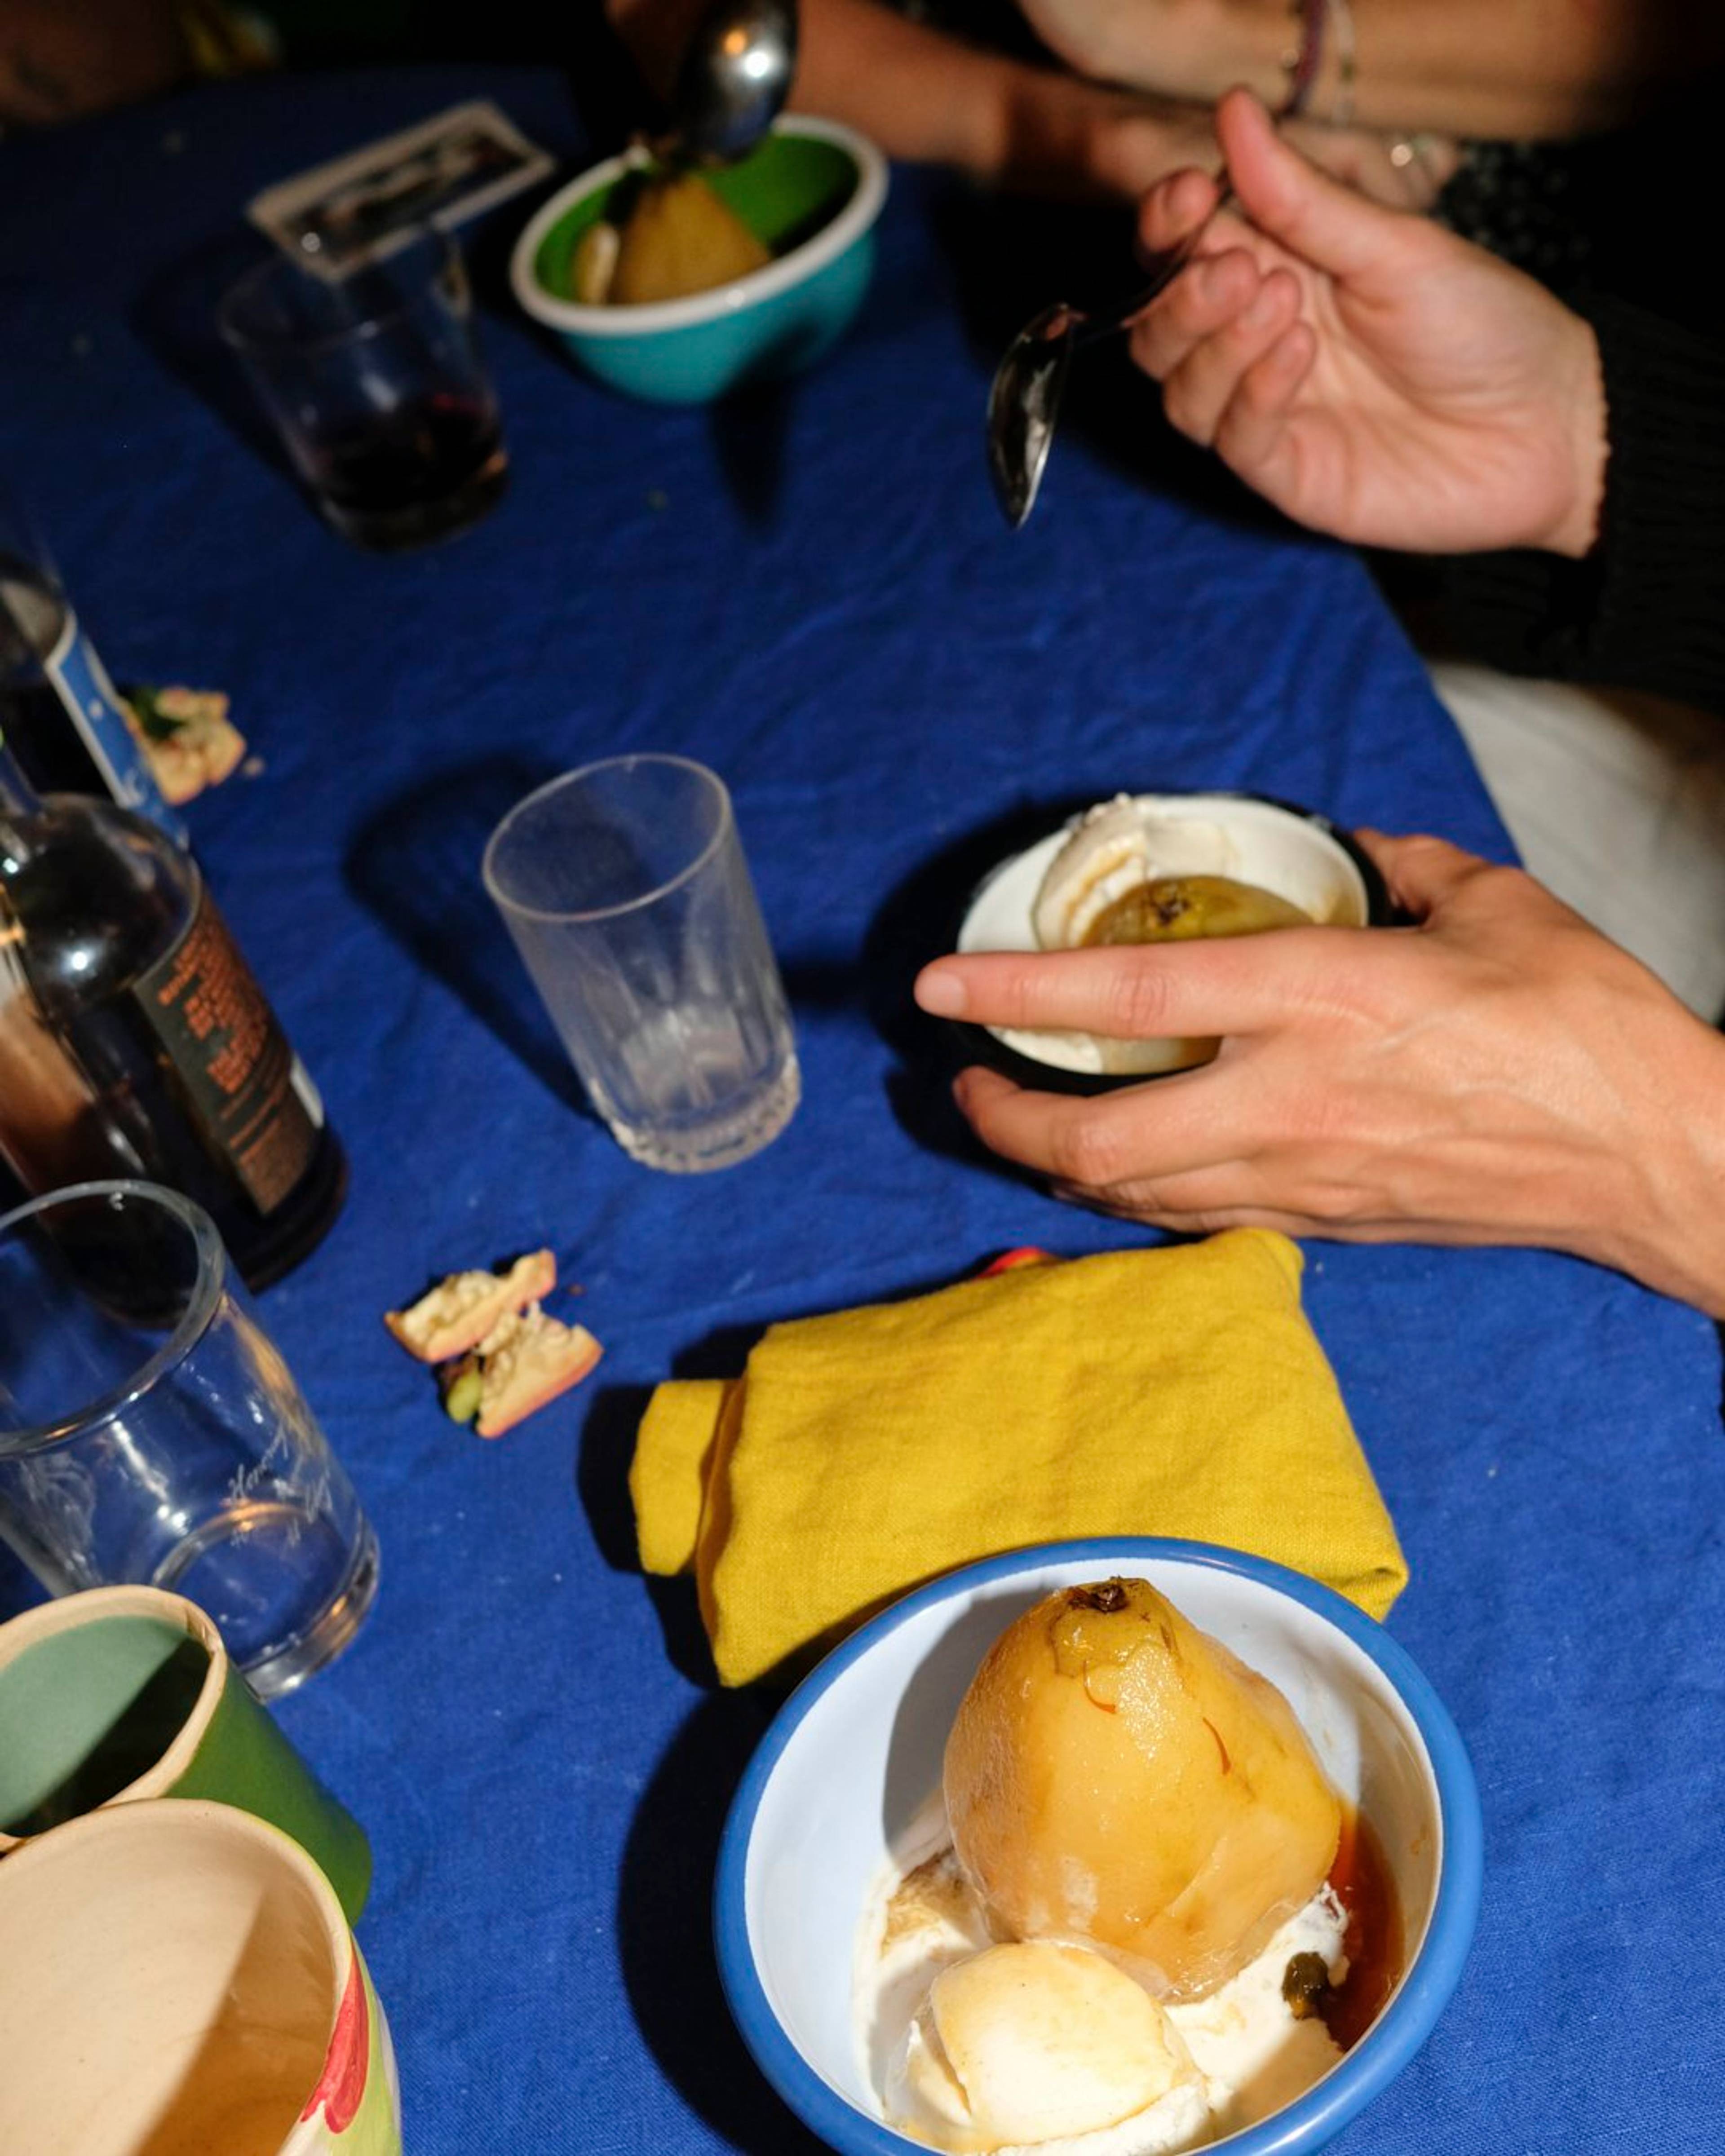 poached pears being eaten out bowls at the dinner table with yellow and blue table linens